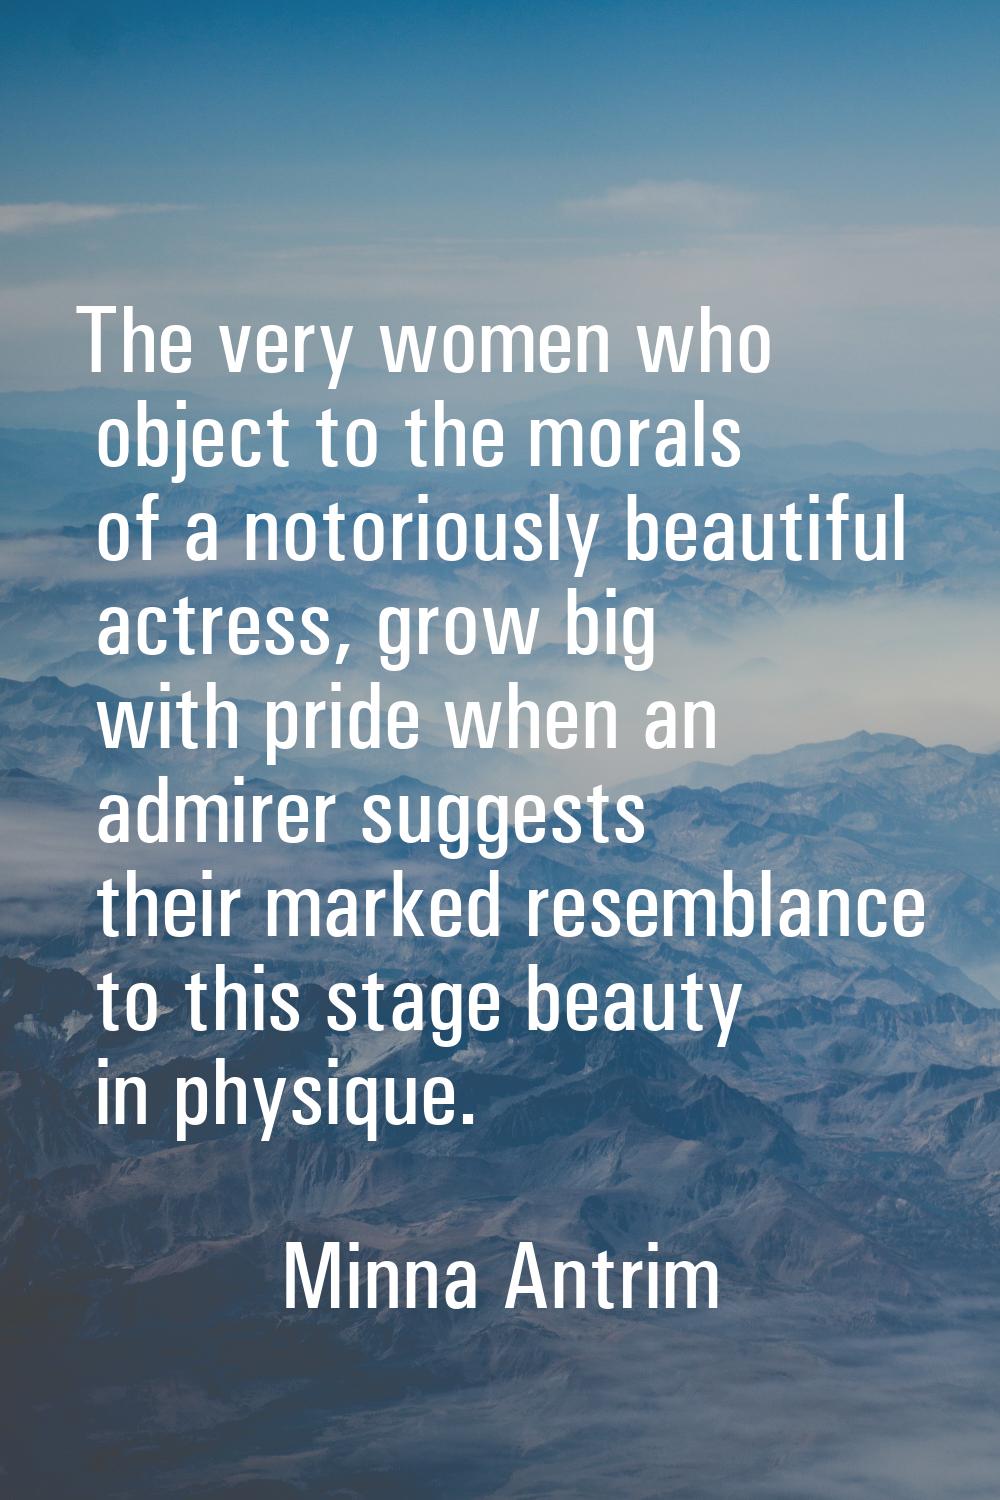 The very women who object to the morals of a notoriously beautiful actress, grow big with pride whe